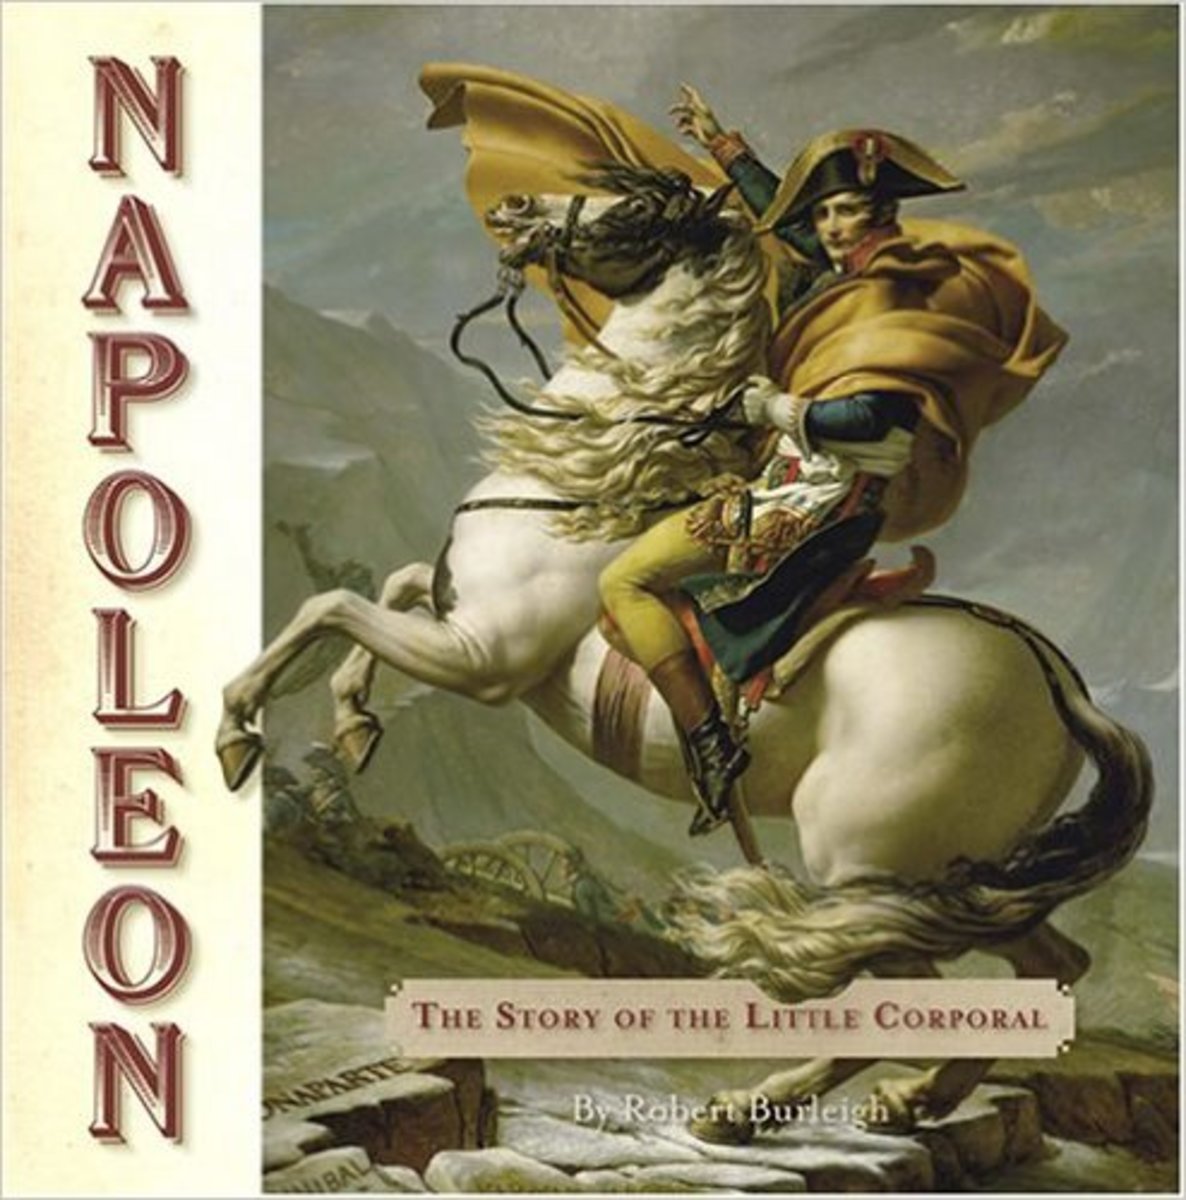 Napoleon: The Story of the Little Corporal by Robert Burleigh